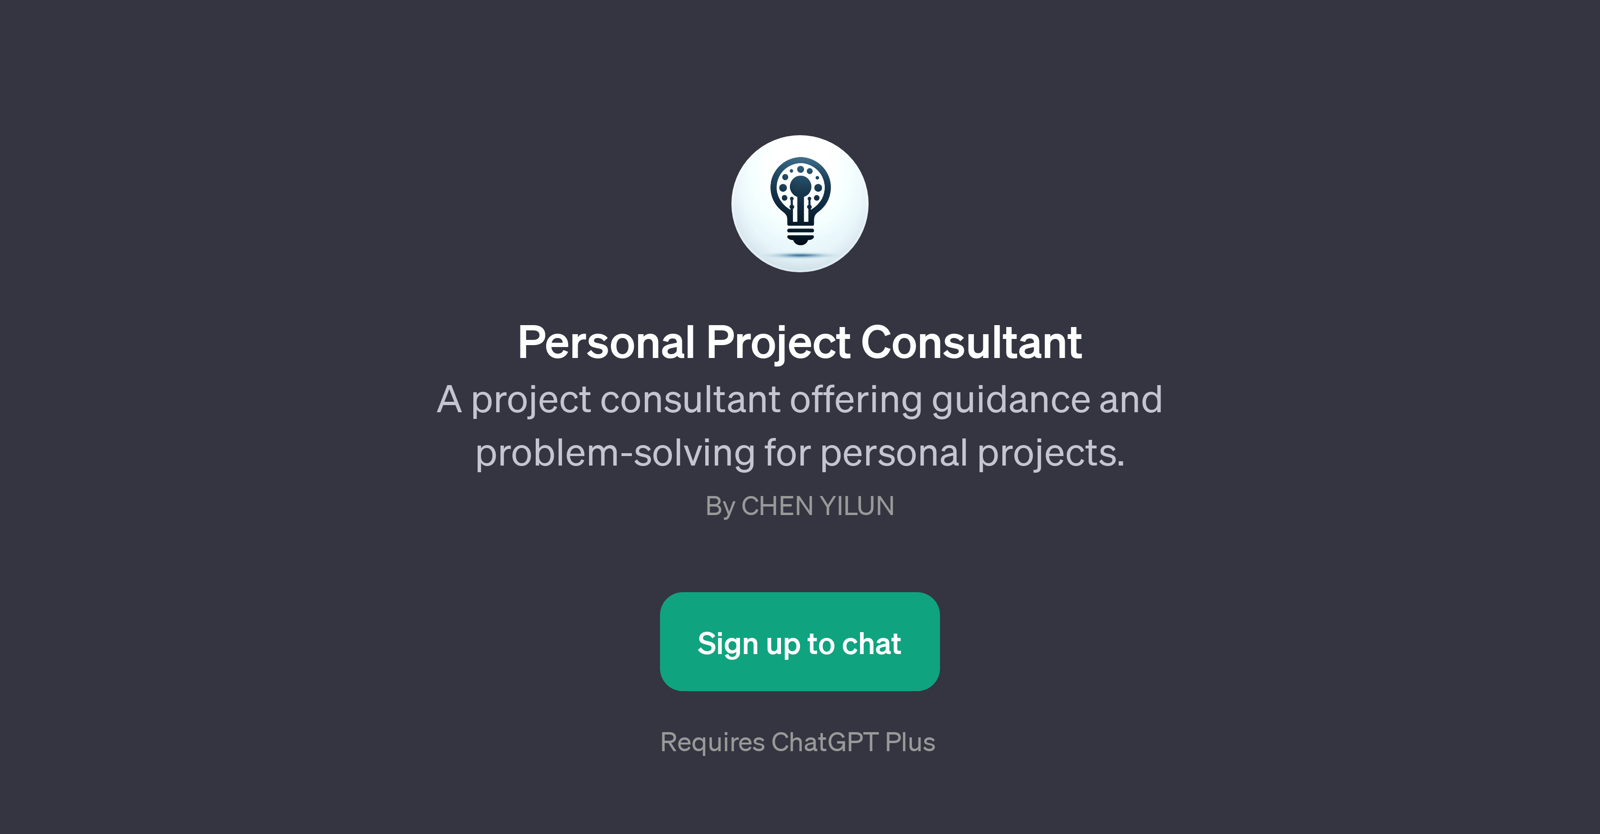 Personal Project Consultant website